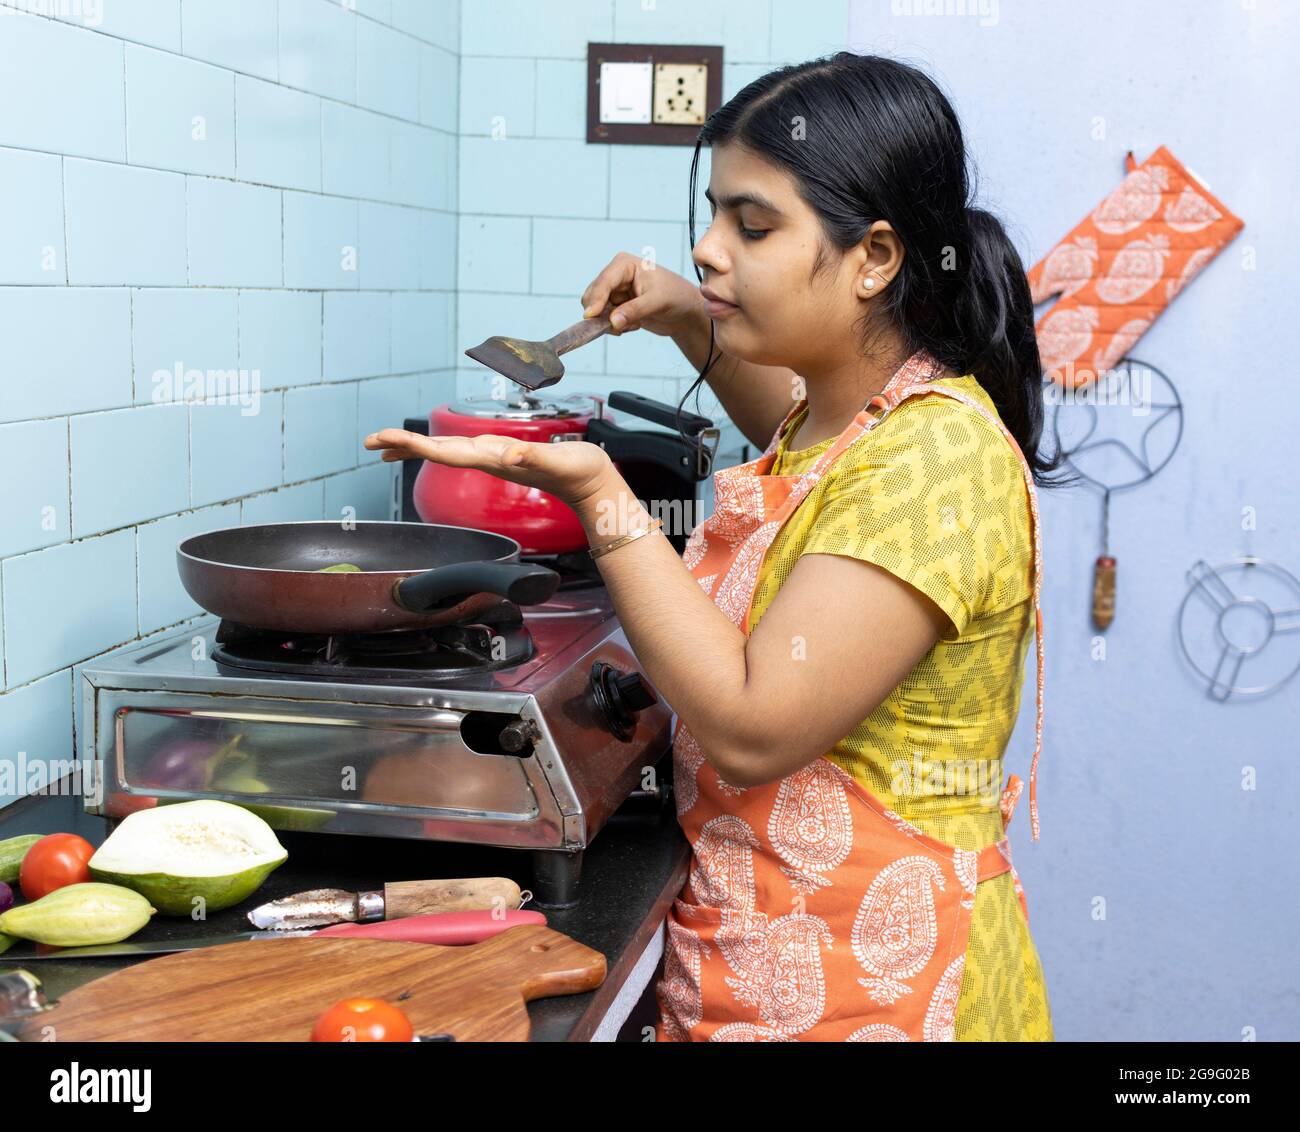 A Pretty Indian Young Woman Wearing Apron Cooking And Tasting Food In Domestic Kitchen On Gas 